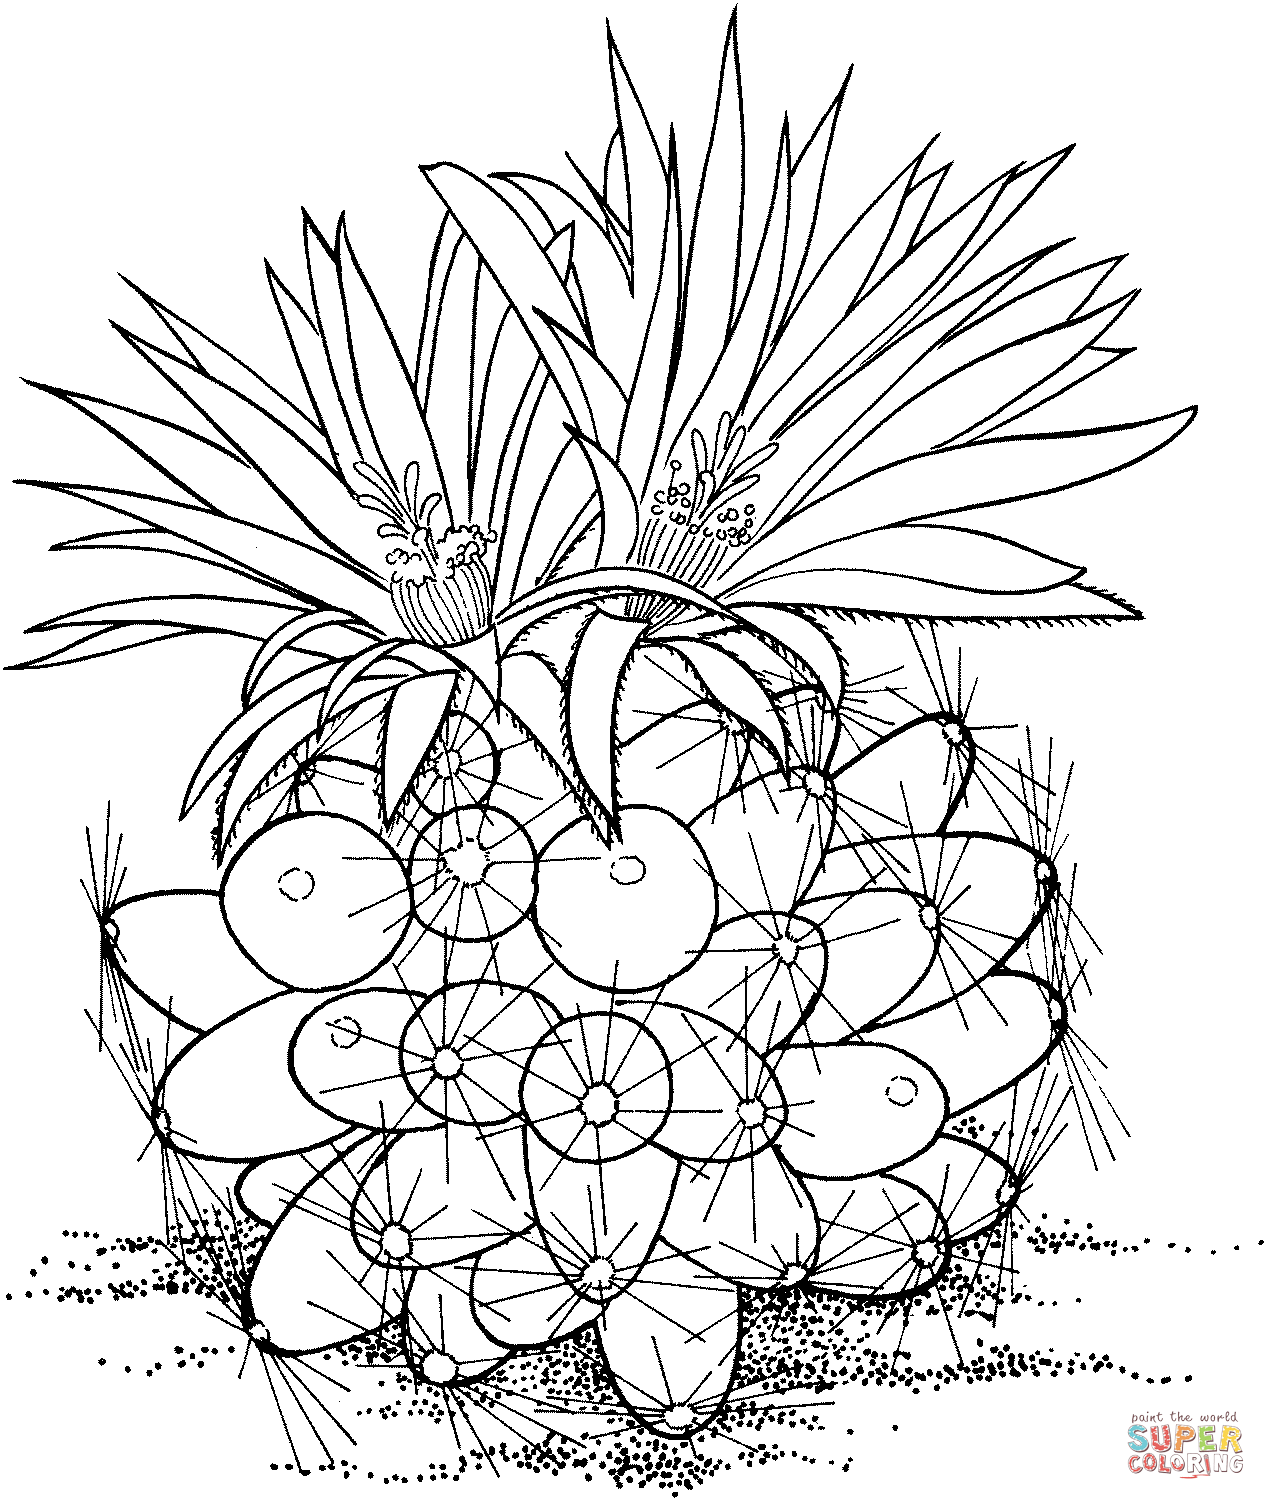 Escobaria Missouriensis Or Missouri Foxtail Cactus Coloring Pages